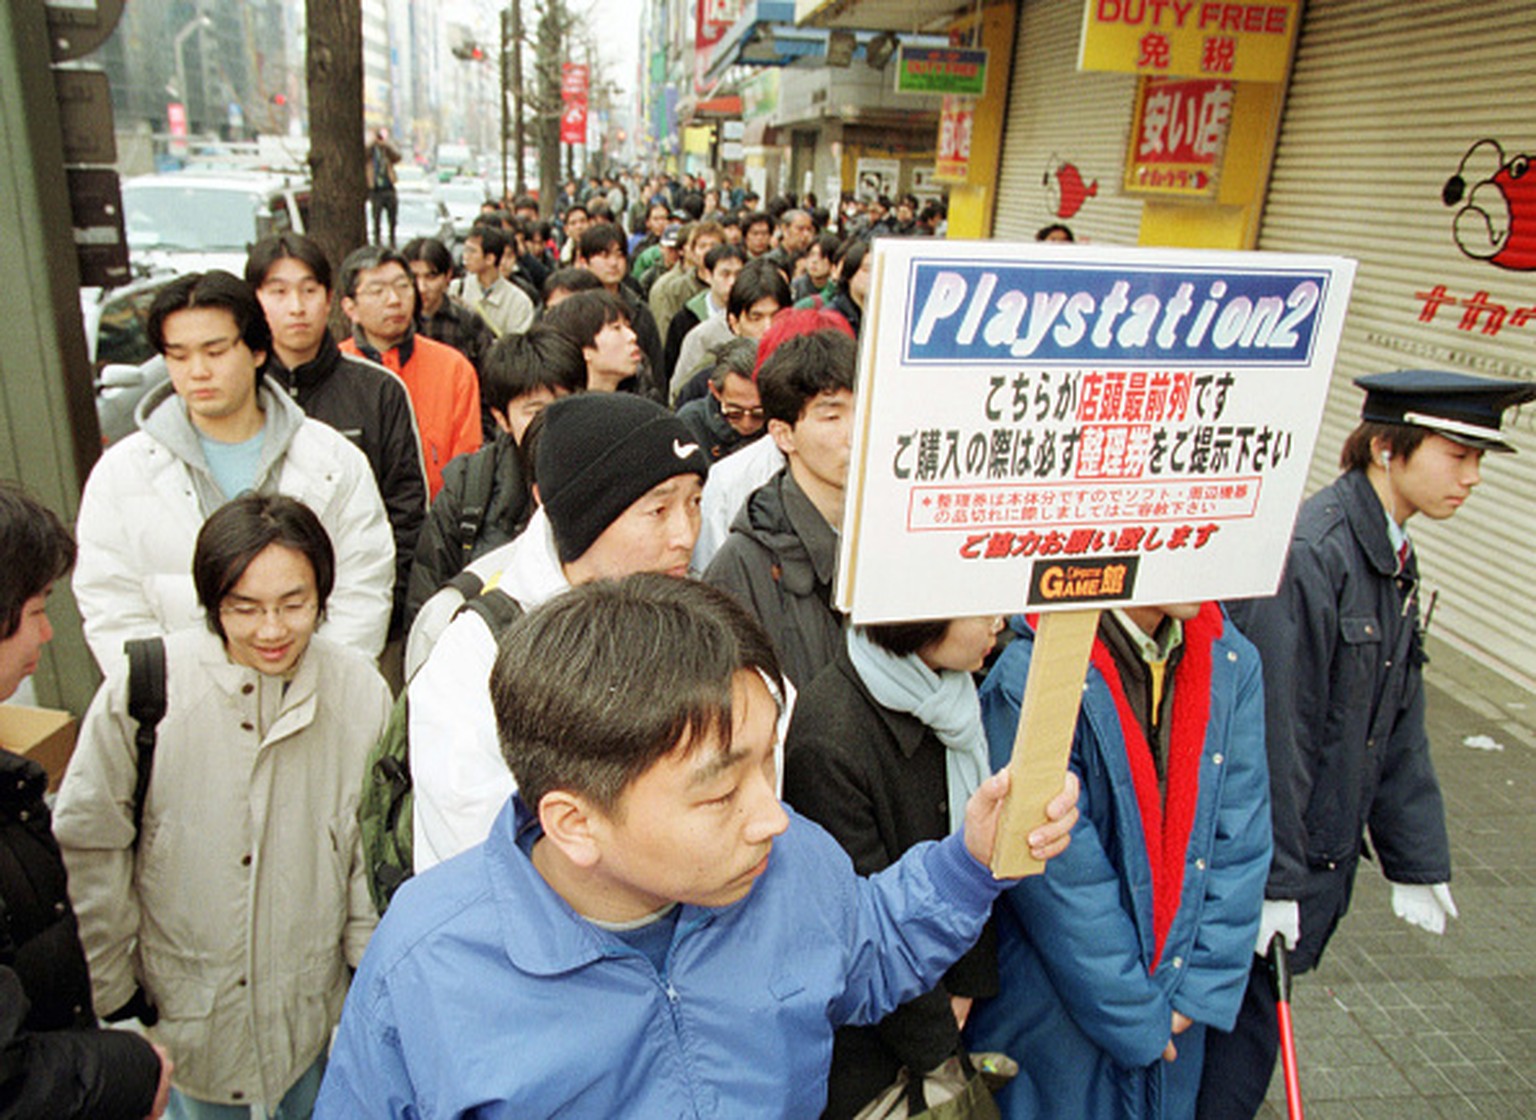 (Original Caption) Almost 5000 Japanese Playstation fans waiting for the video game shops to open in Akihabara quarter. (Photo by noboru hashimoto/Corbis via Getty Images)